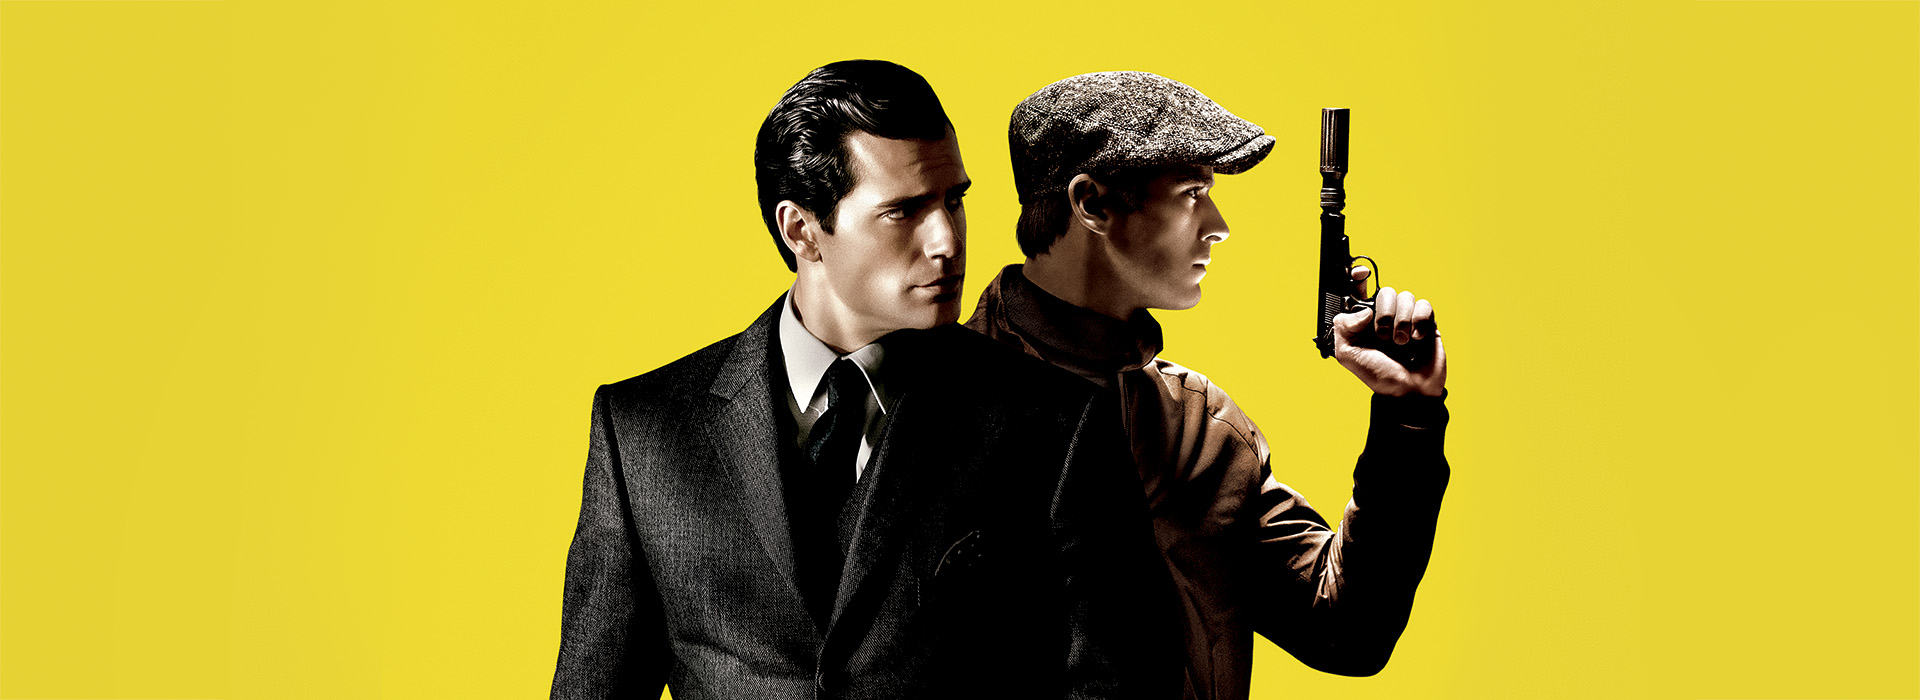 Movie poster The Man from U.N.C.L.E.